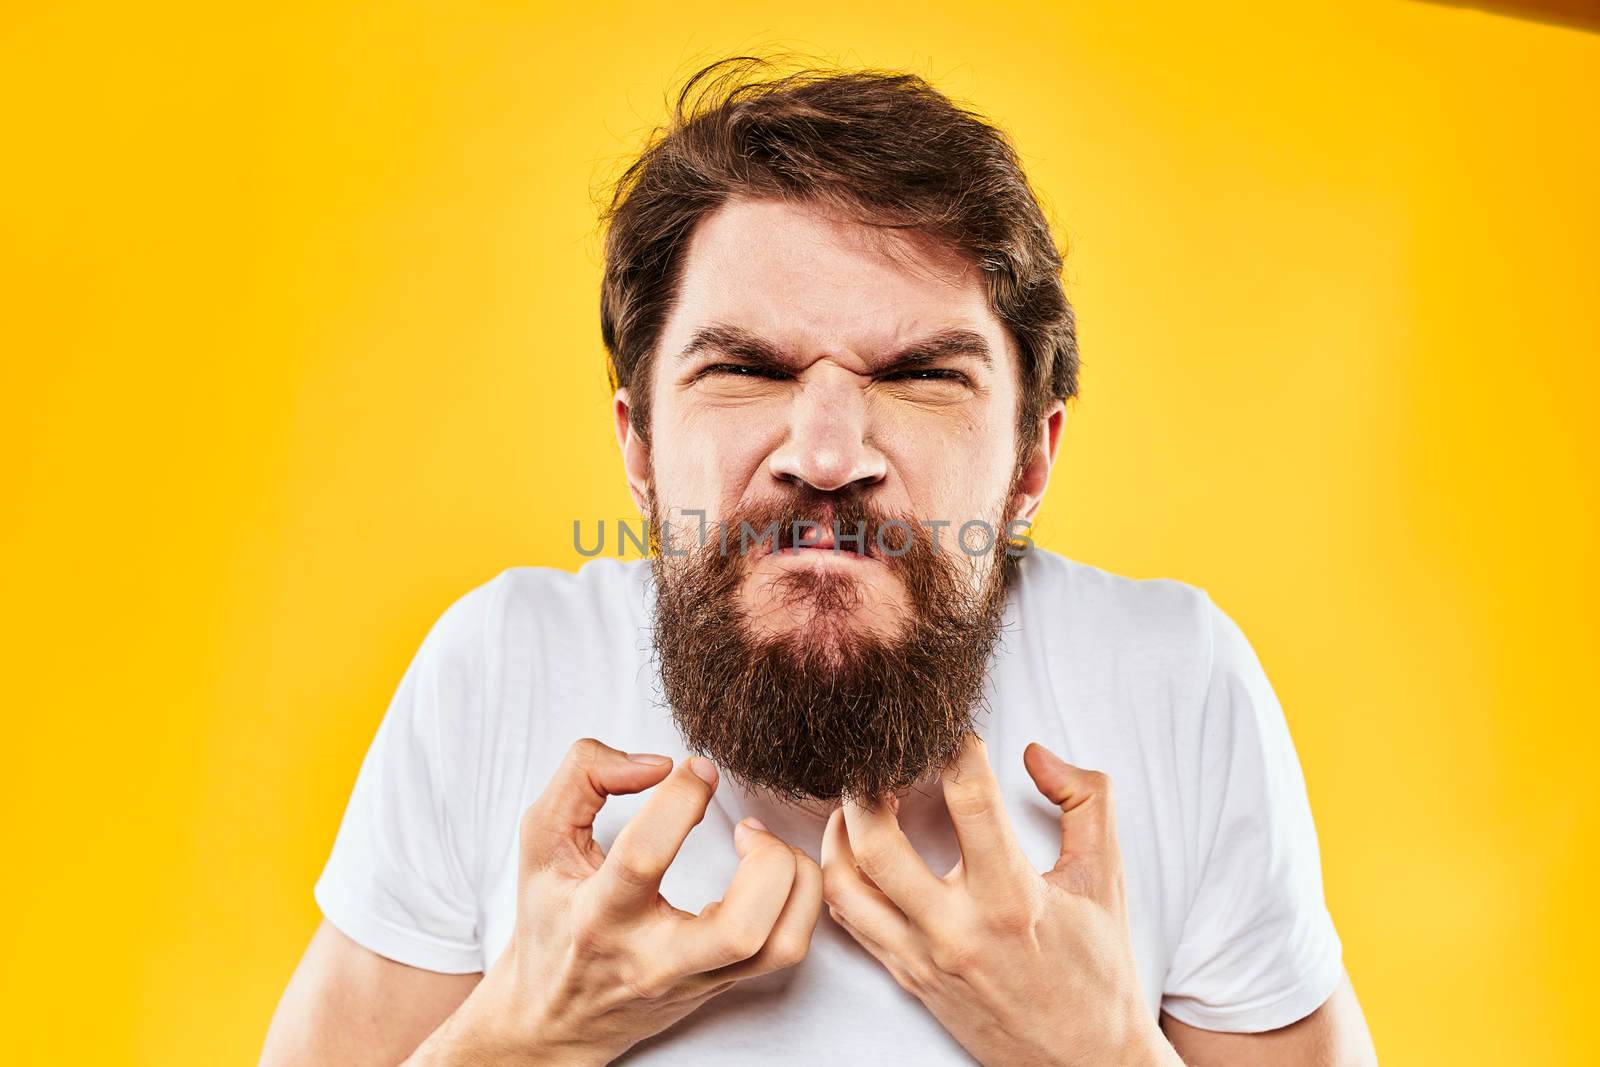 emotional bearded man gesturing with hands aggression discontent close-up yellow background by SHOTPRIME